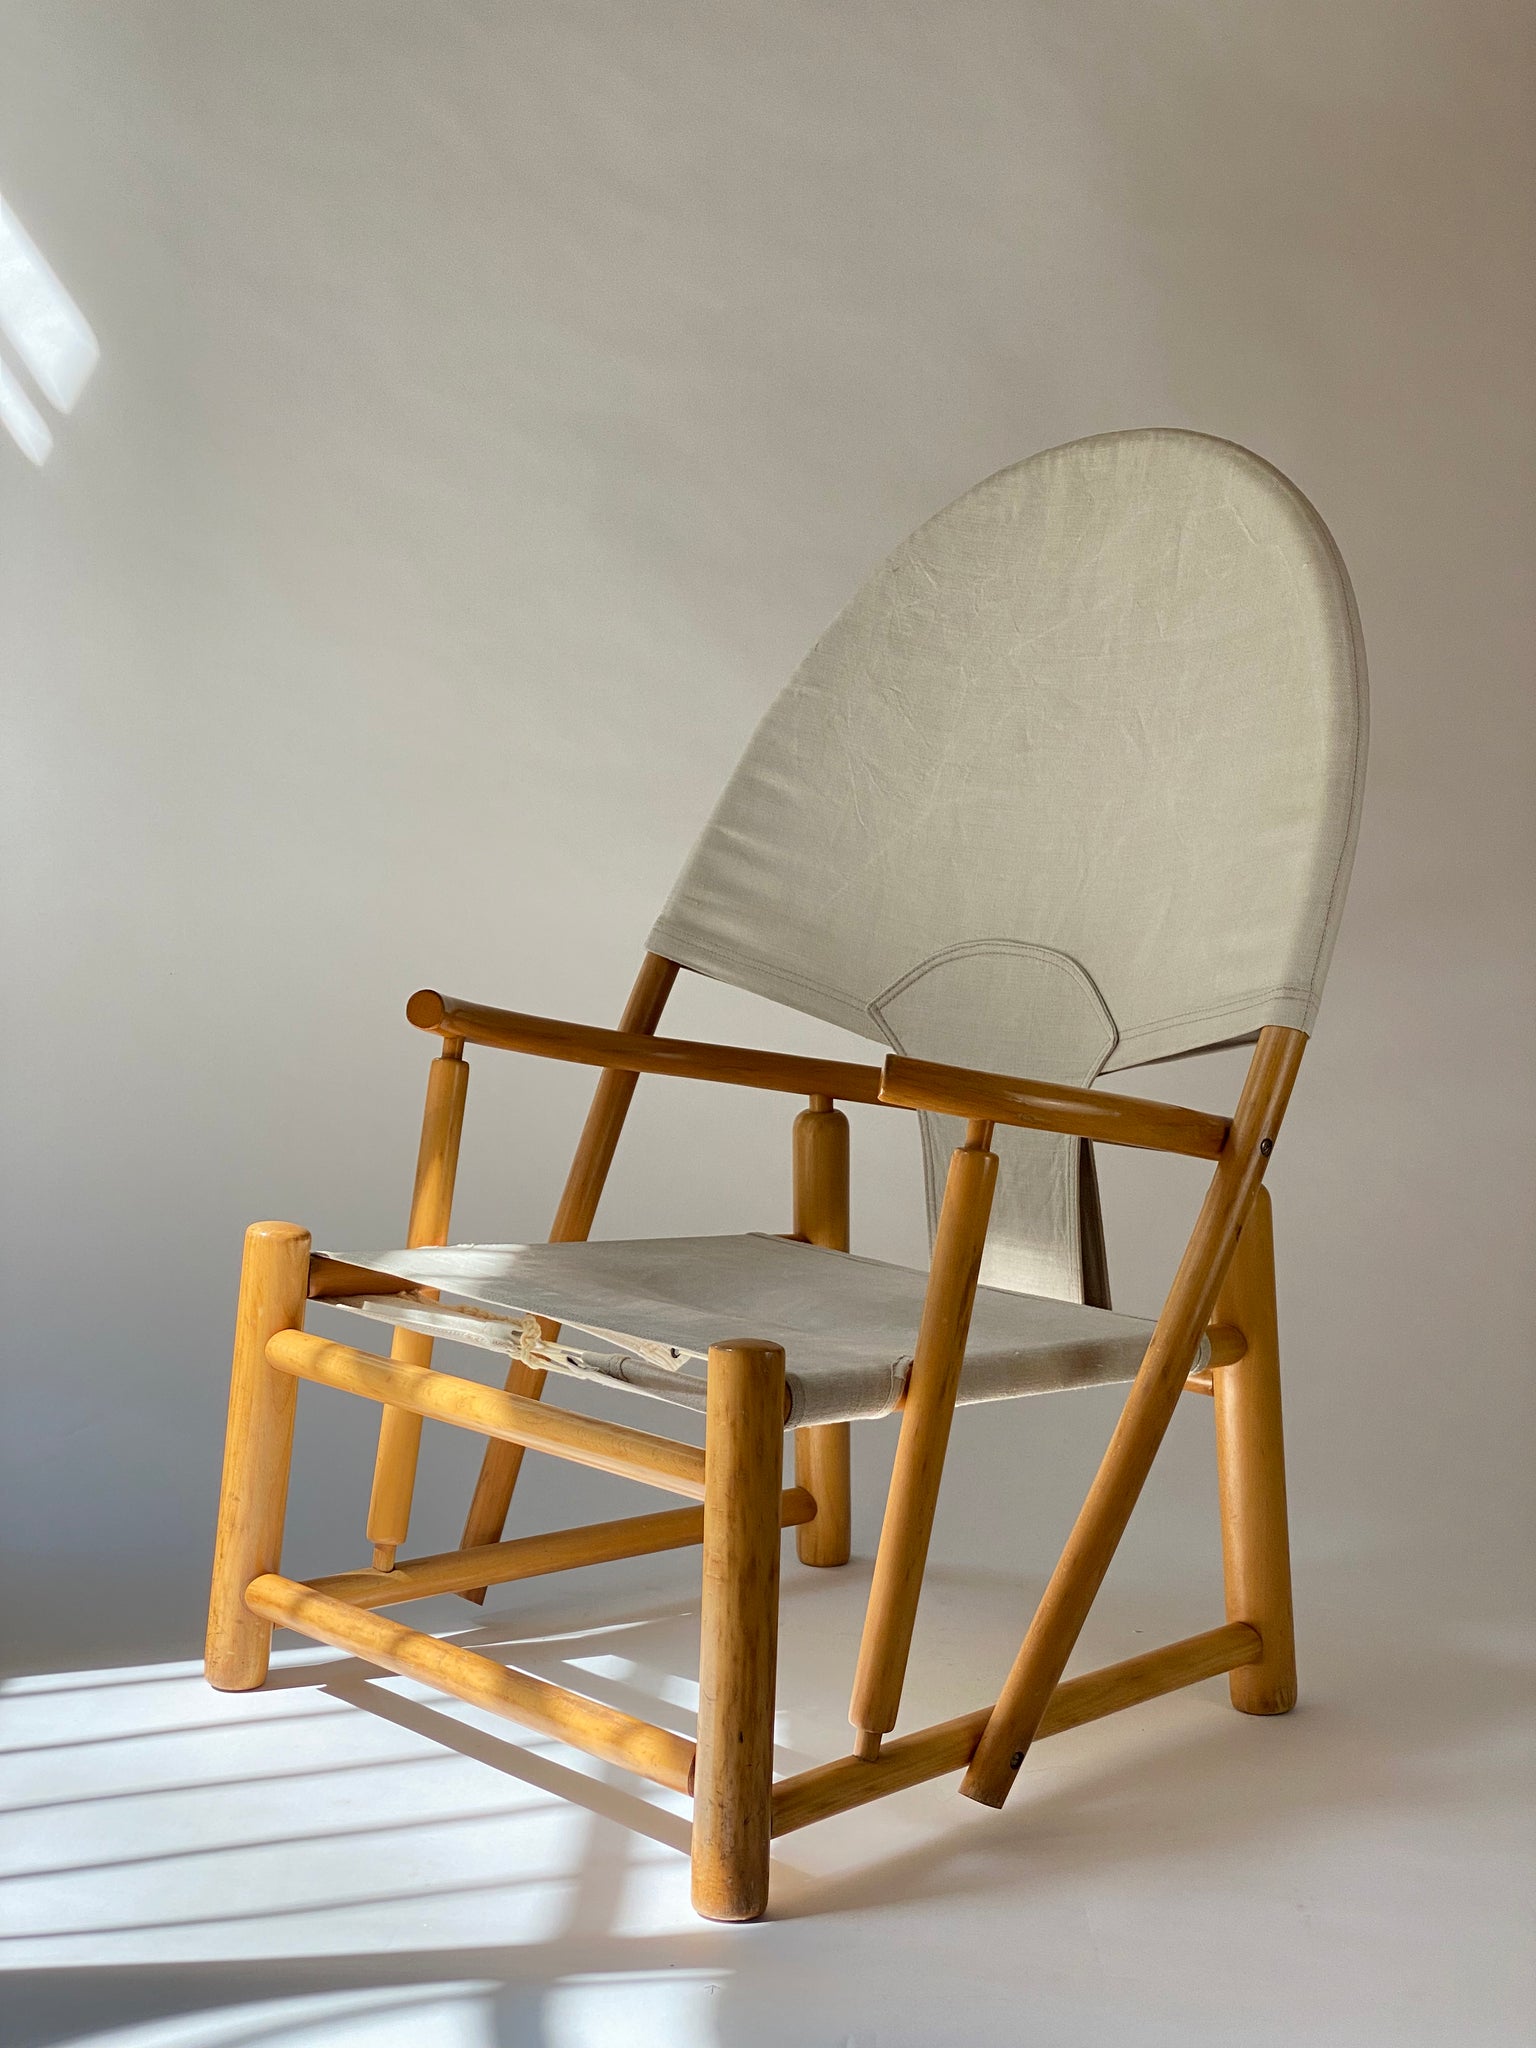 G23 Hoop Lounge Chair by – & ANOTHER Germa, JUNE Palange for Piero Werther Toffoloni